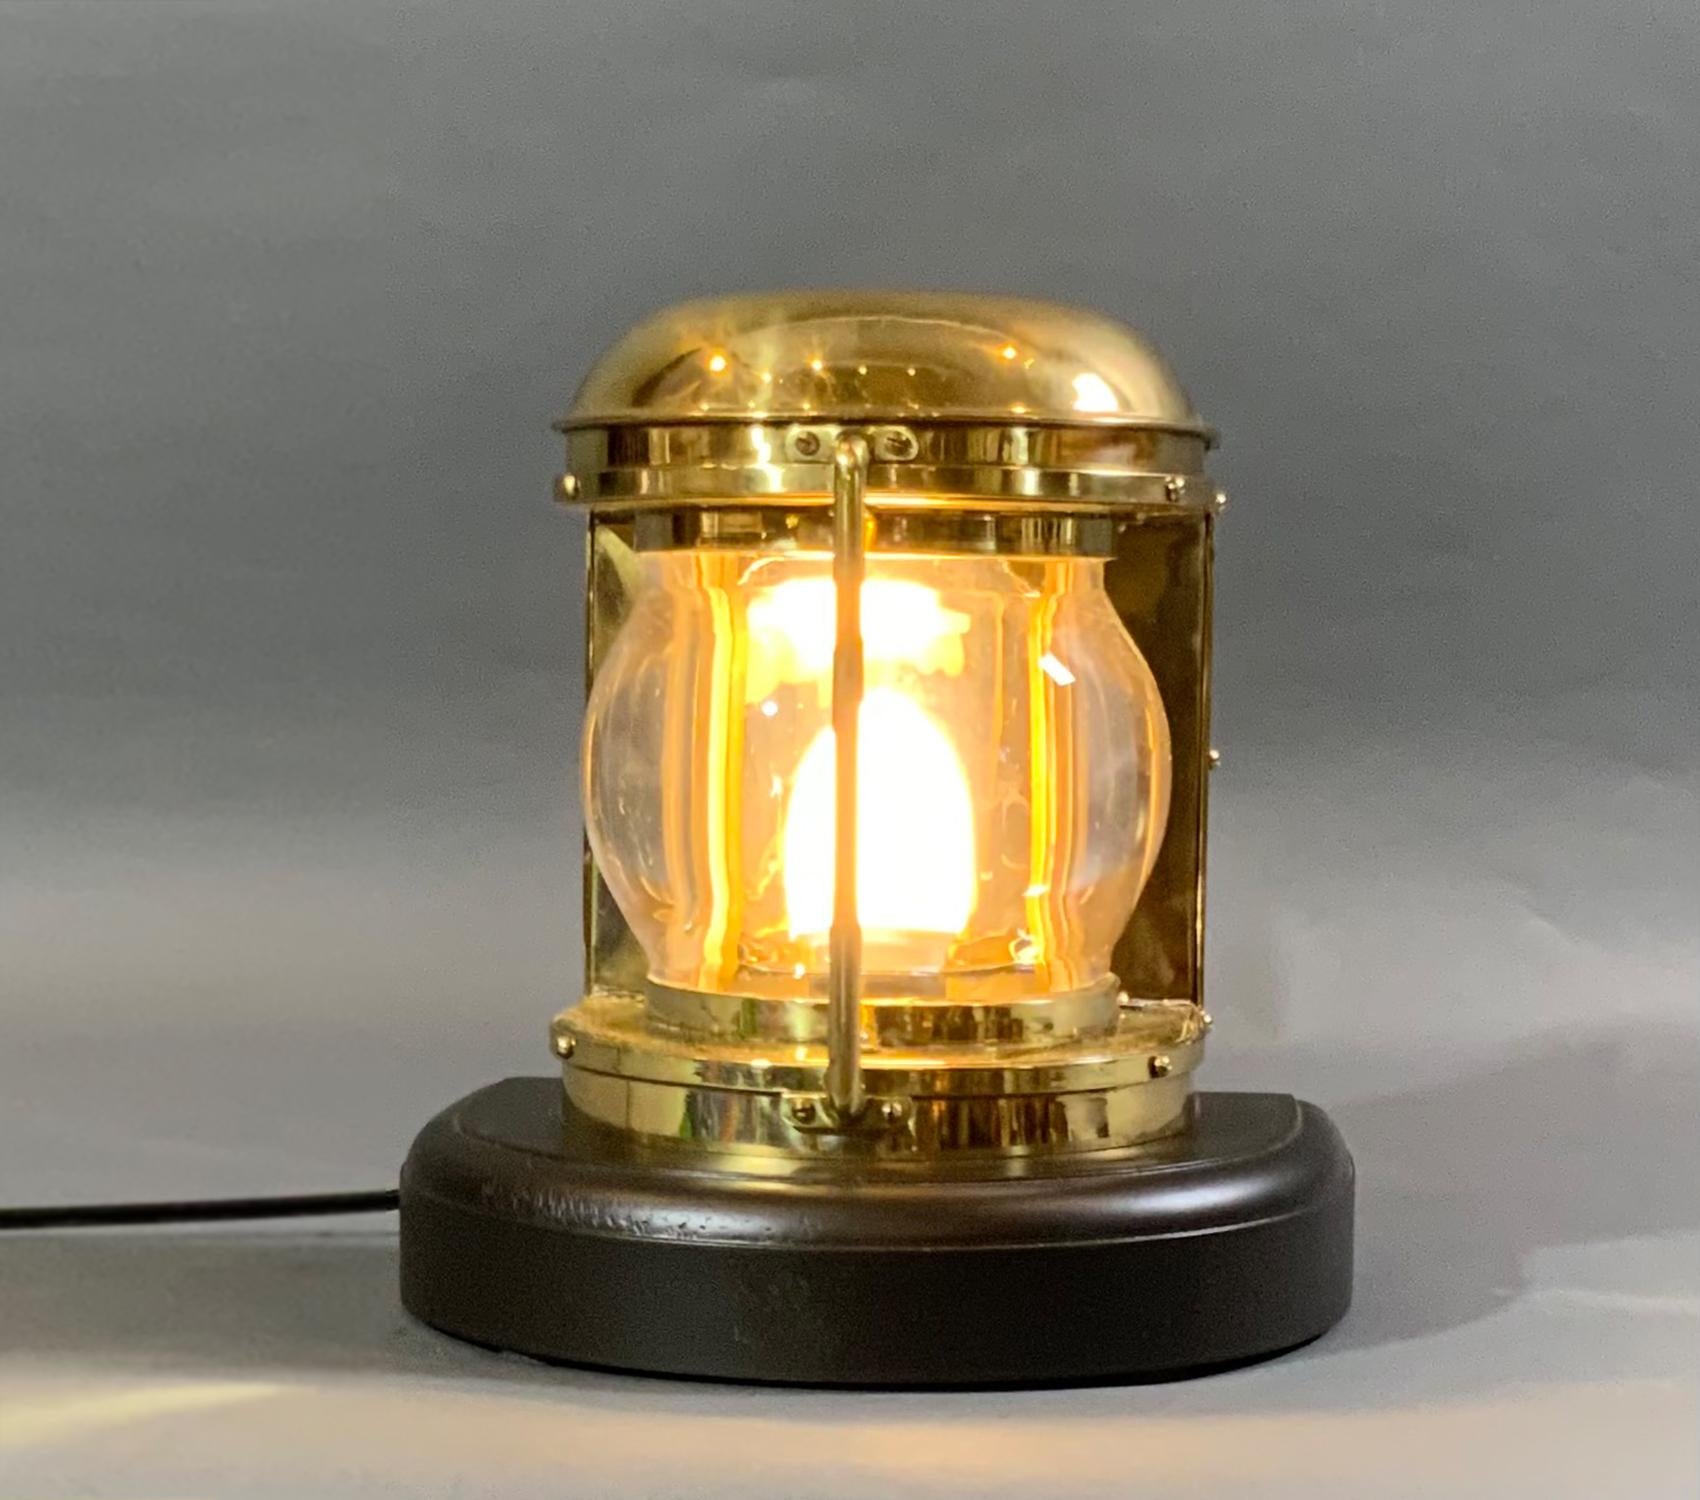 Solid brass meticulously polished and lacquered ship or boat bow lantern. Thick curved lens, protective brass header bar. Unit has been recently electrified. Mounted to a custom mahogany base. 

Weight: 7 LBS
Overall dimensions: 10” H x 10” L x